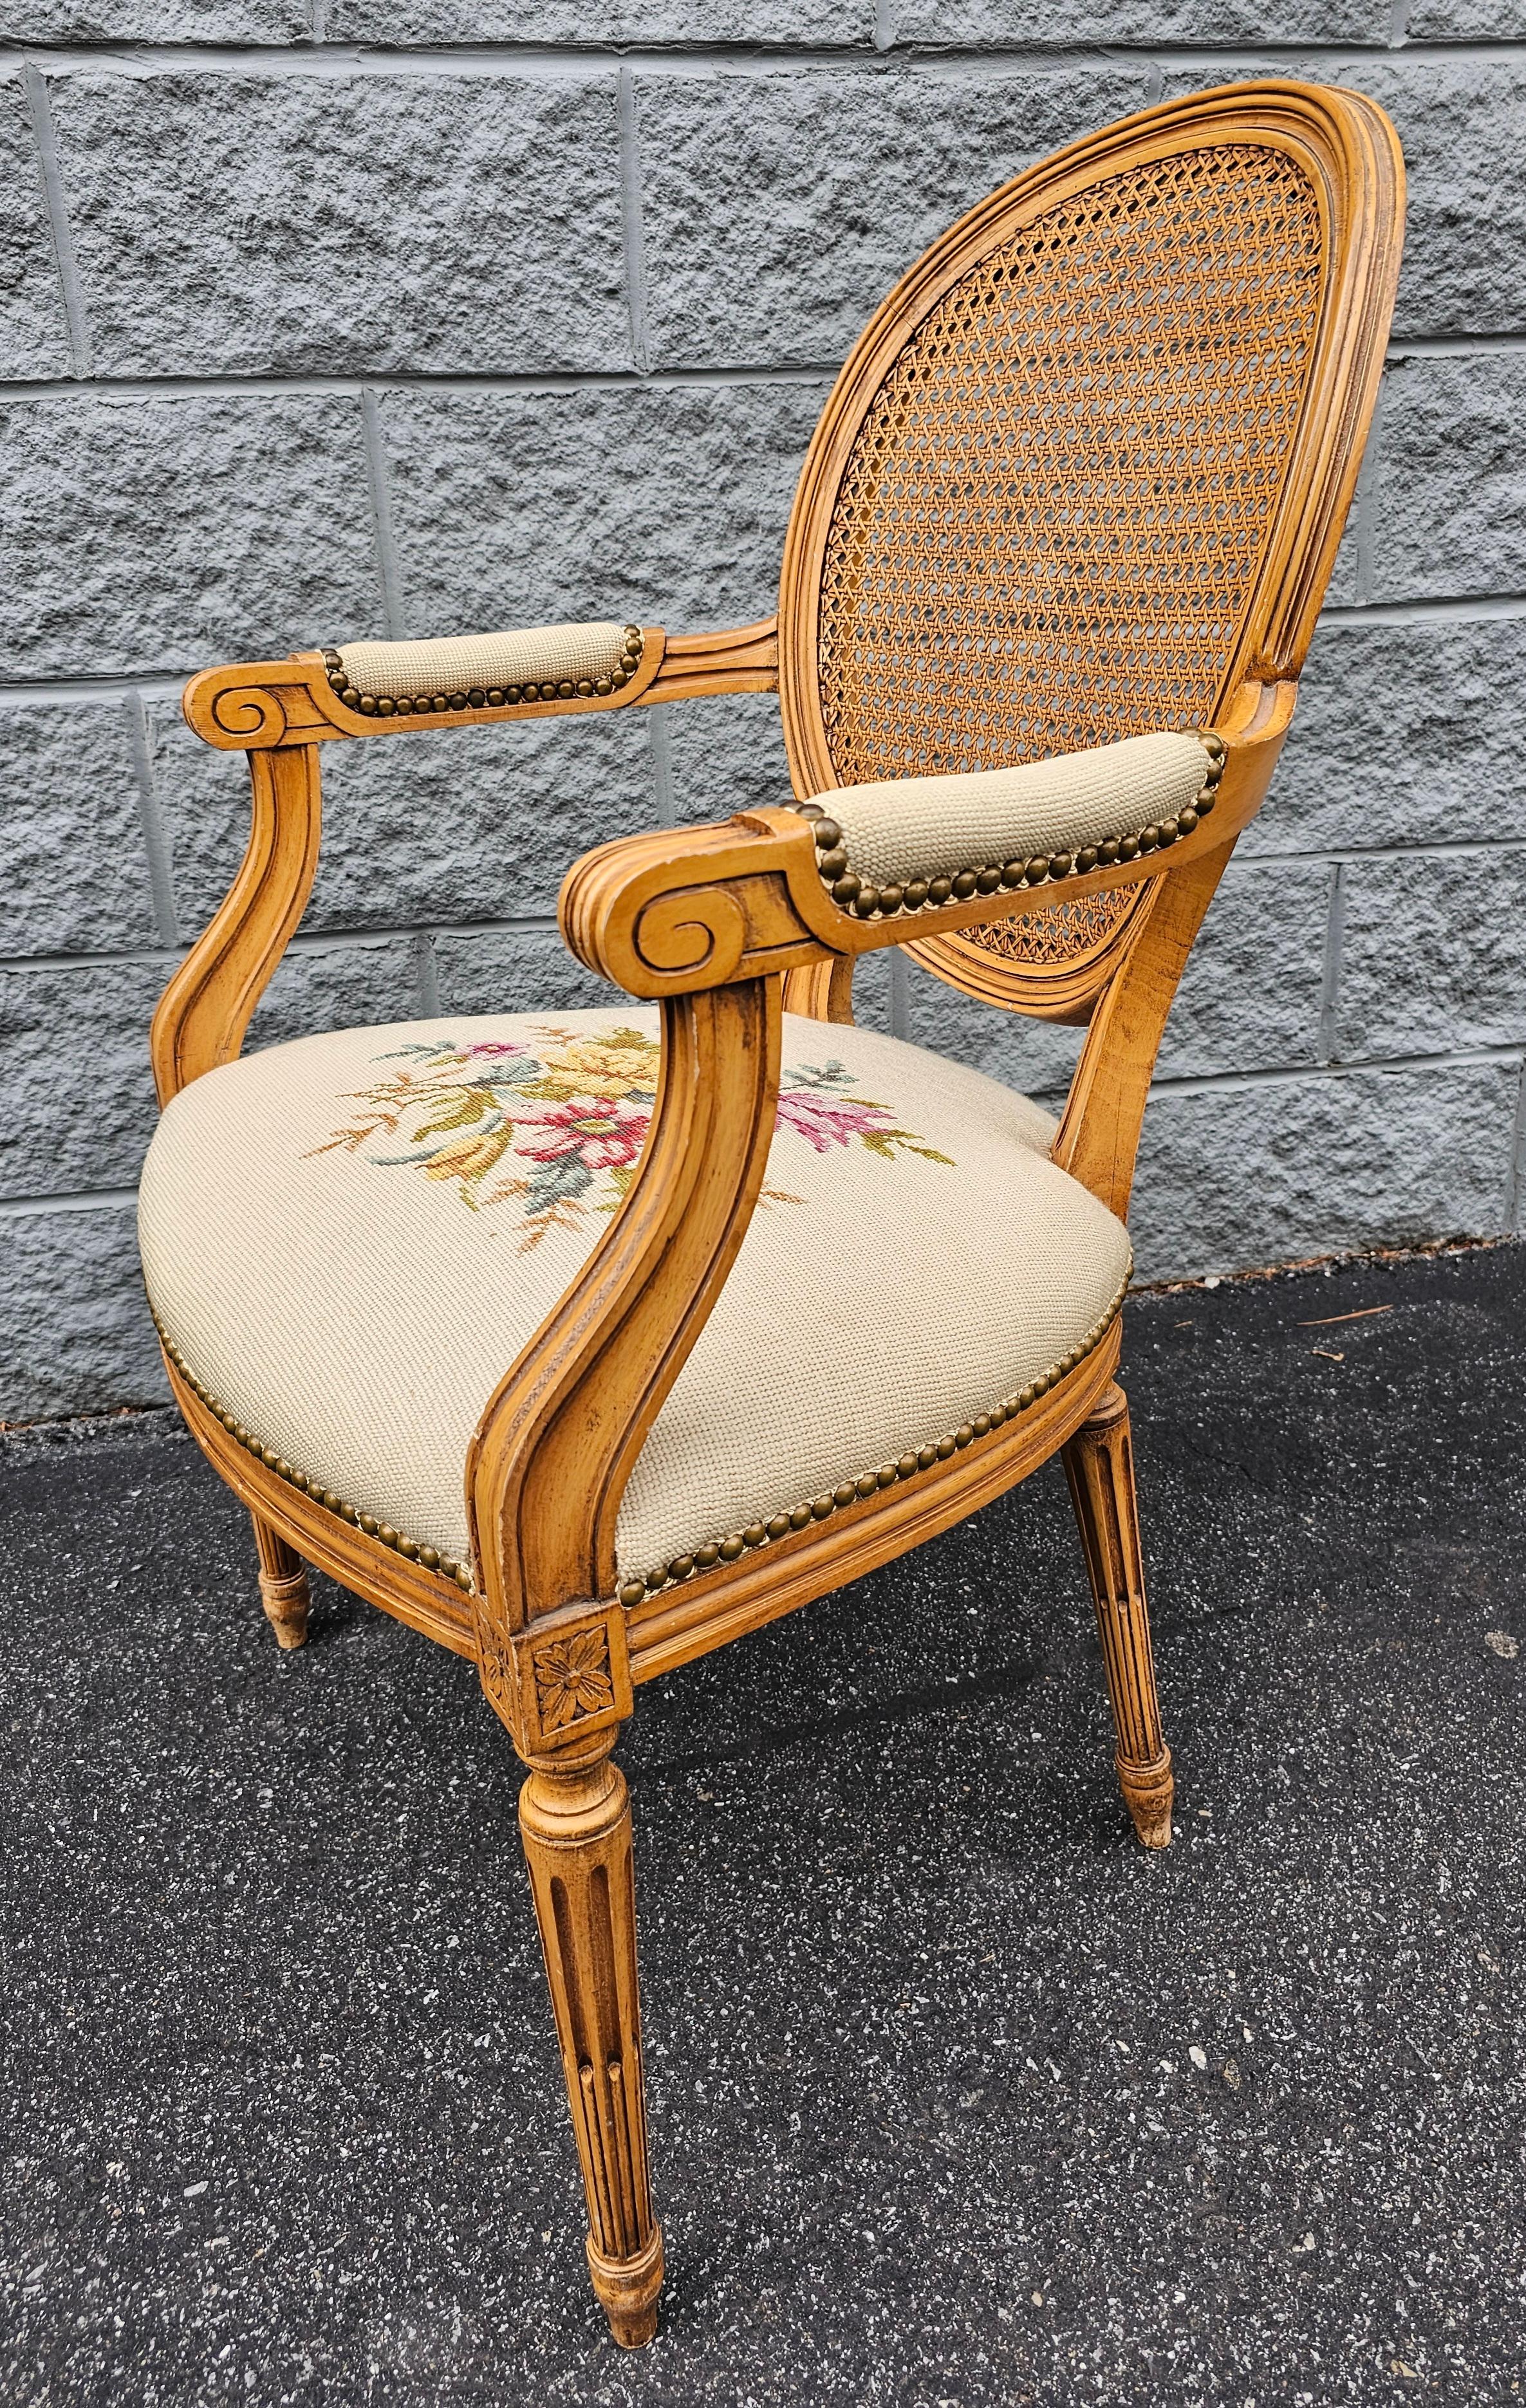 Louis XVI Style Fruitwood, Needlepoint Upholstered Seat And Caned Back Fauteuil In Good Condition For Sale In Germantown, MD